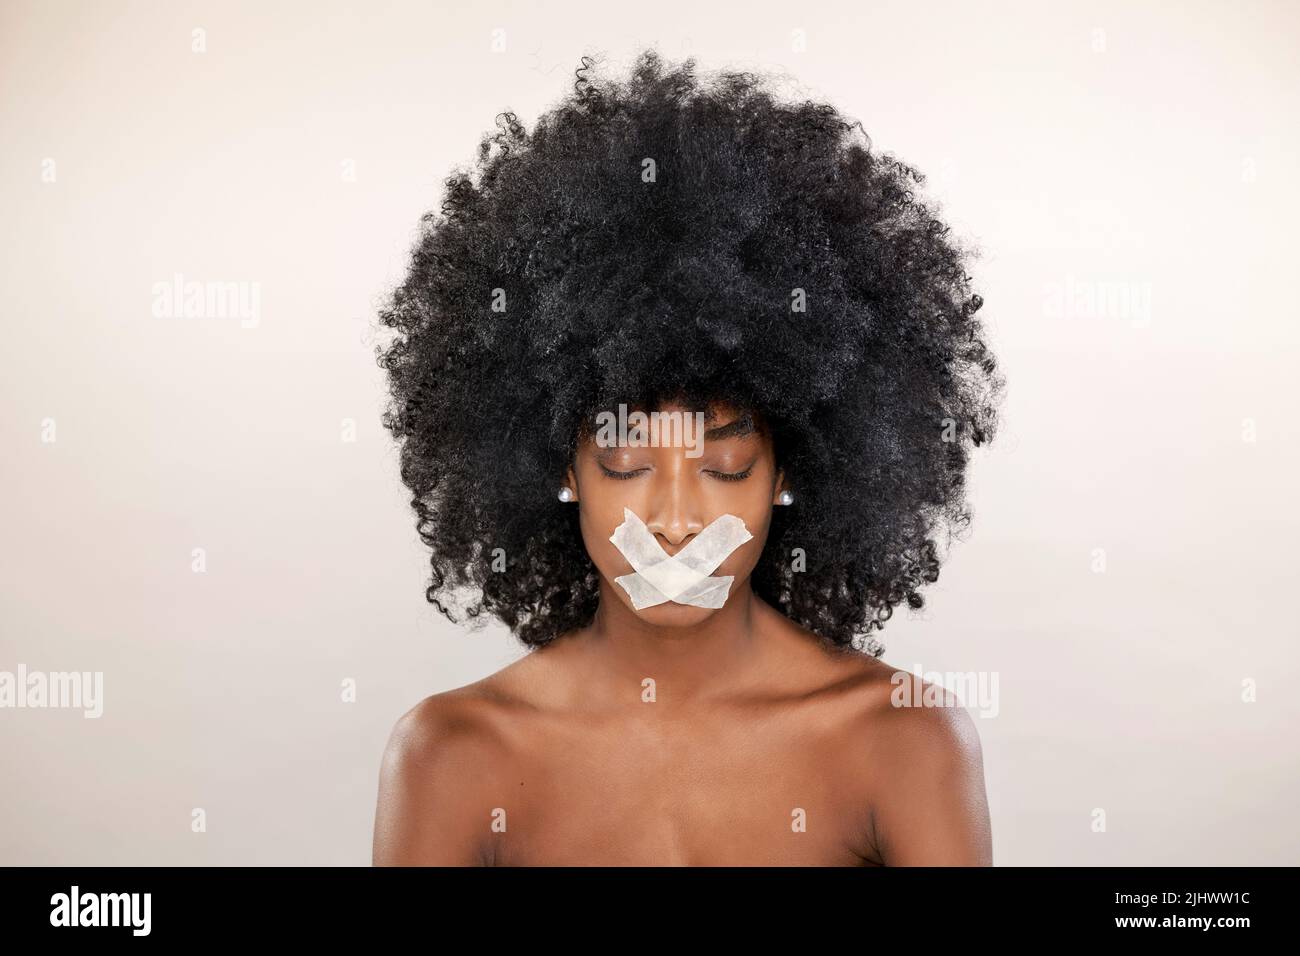 Calm African American female model with Afro hairstyle and tape on lips standing with closed eyes against white background in studio Stock Photo